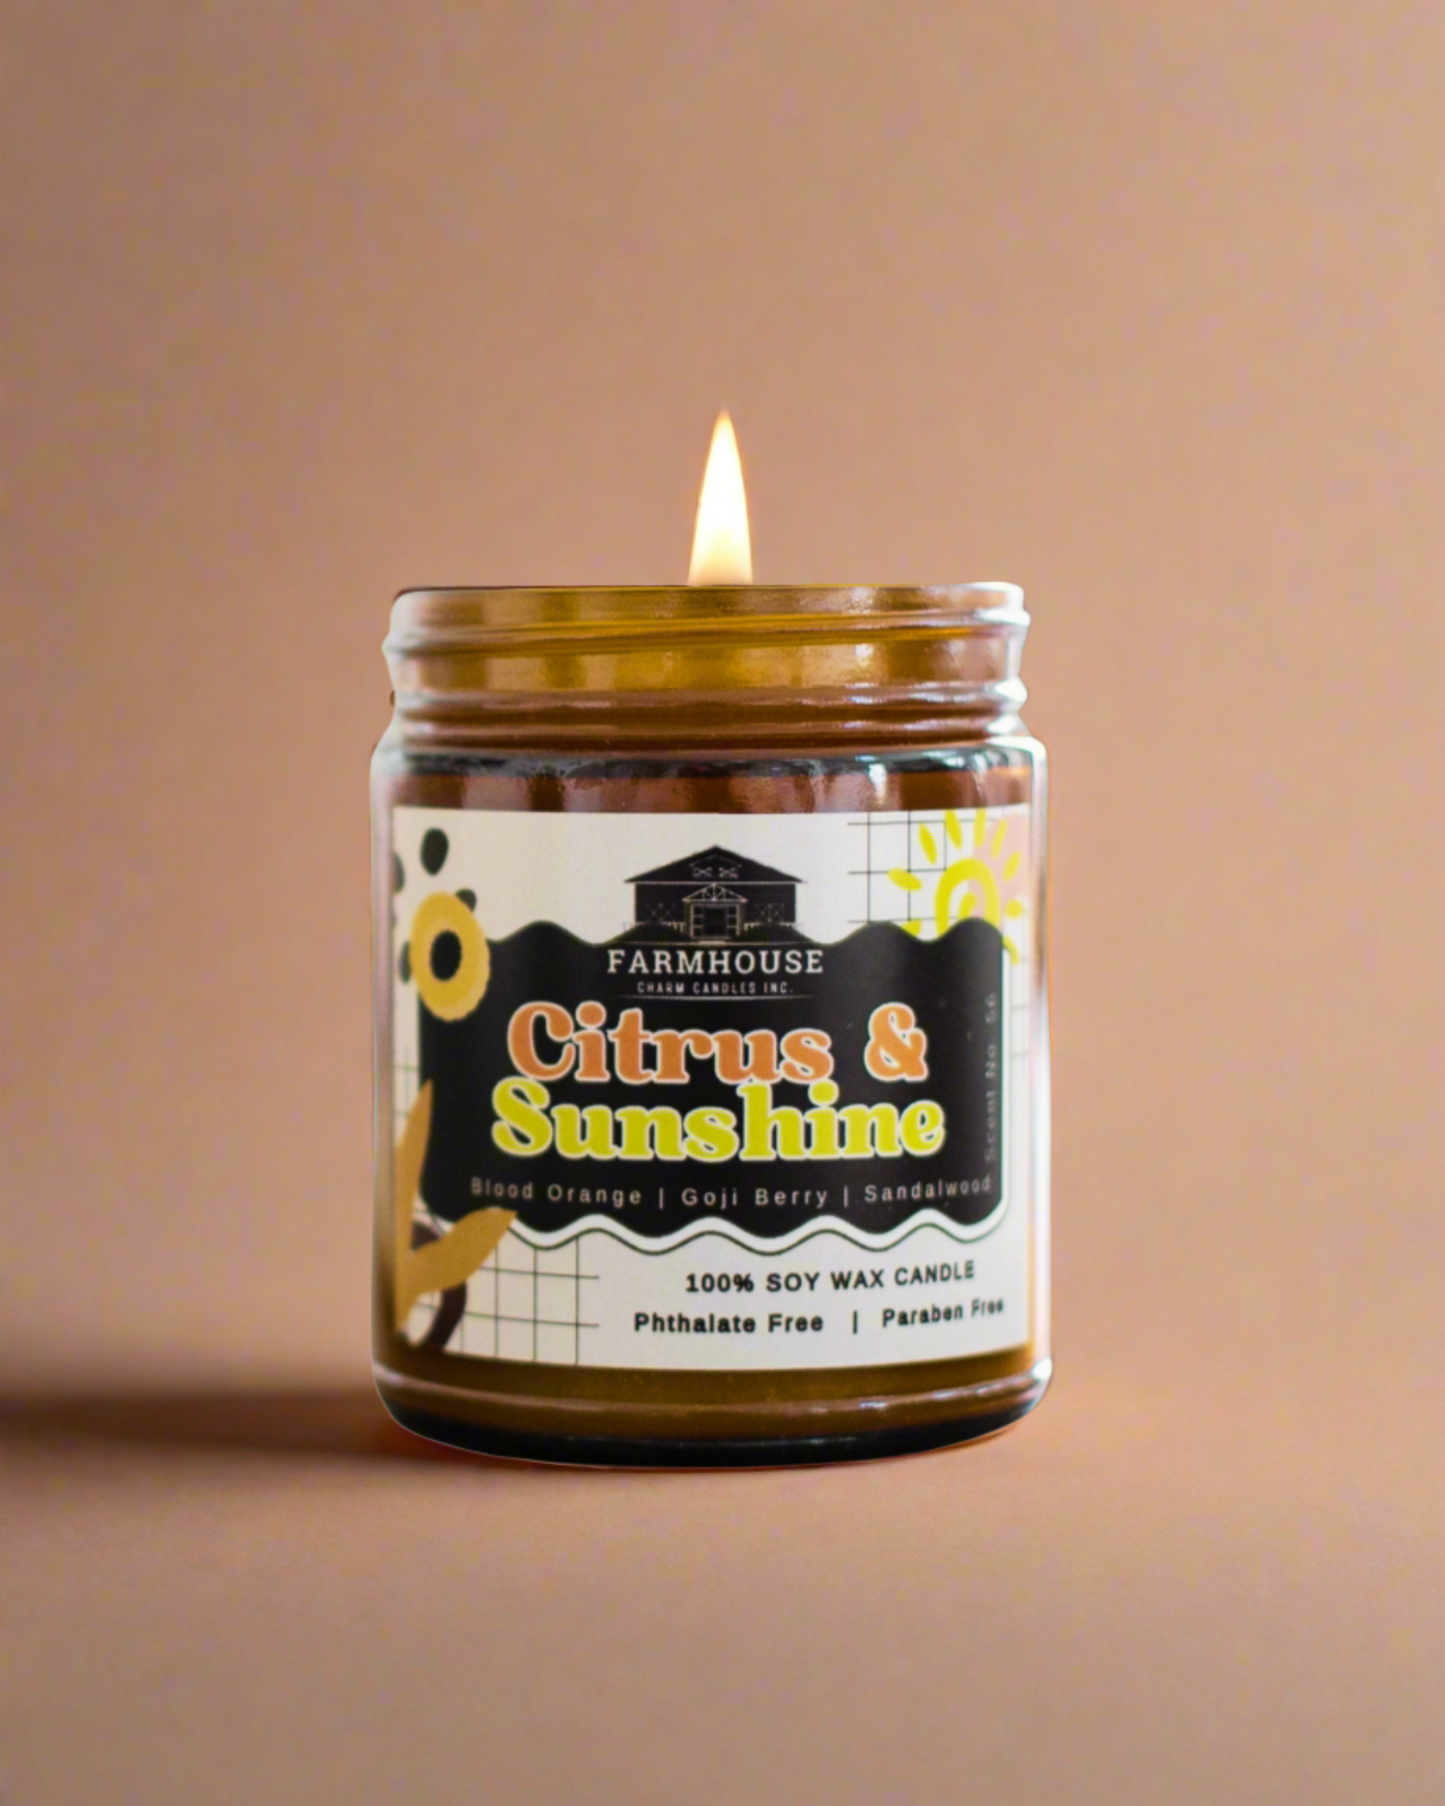 There's something magical about lighting a candle that takes you back to sun-drenched days and warm, nostalgic moments. Our Citrus &amp; Sunshine Soy Candle is crafted to do just that, filling your space with the vibrant and comforting aromas of Blood Orange, Goji Berry, and Sandalwood. www.farmhousecharmcandles.com